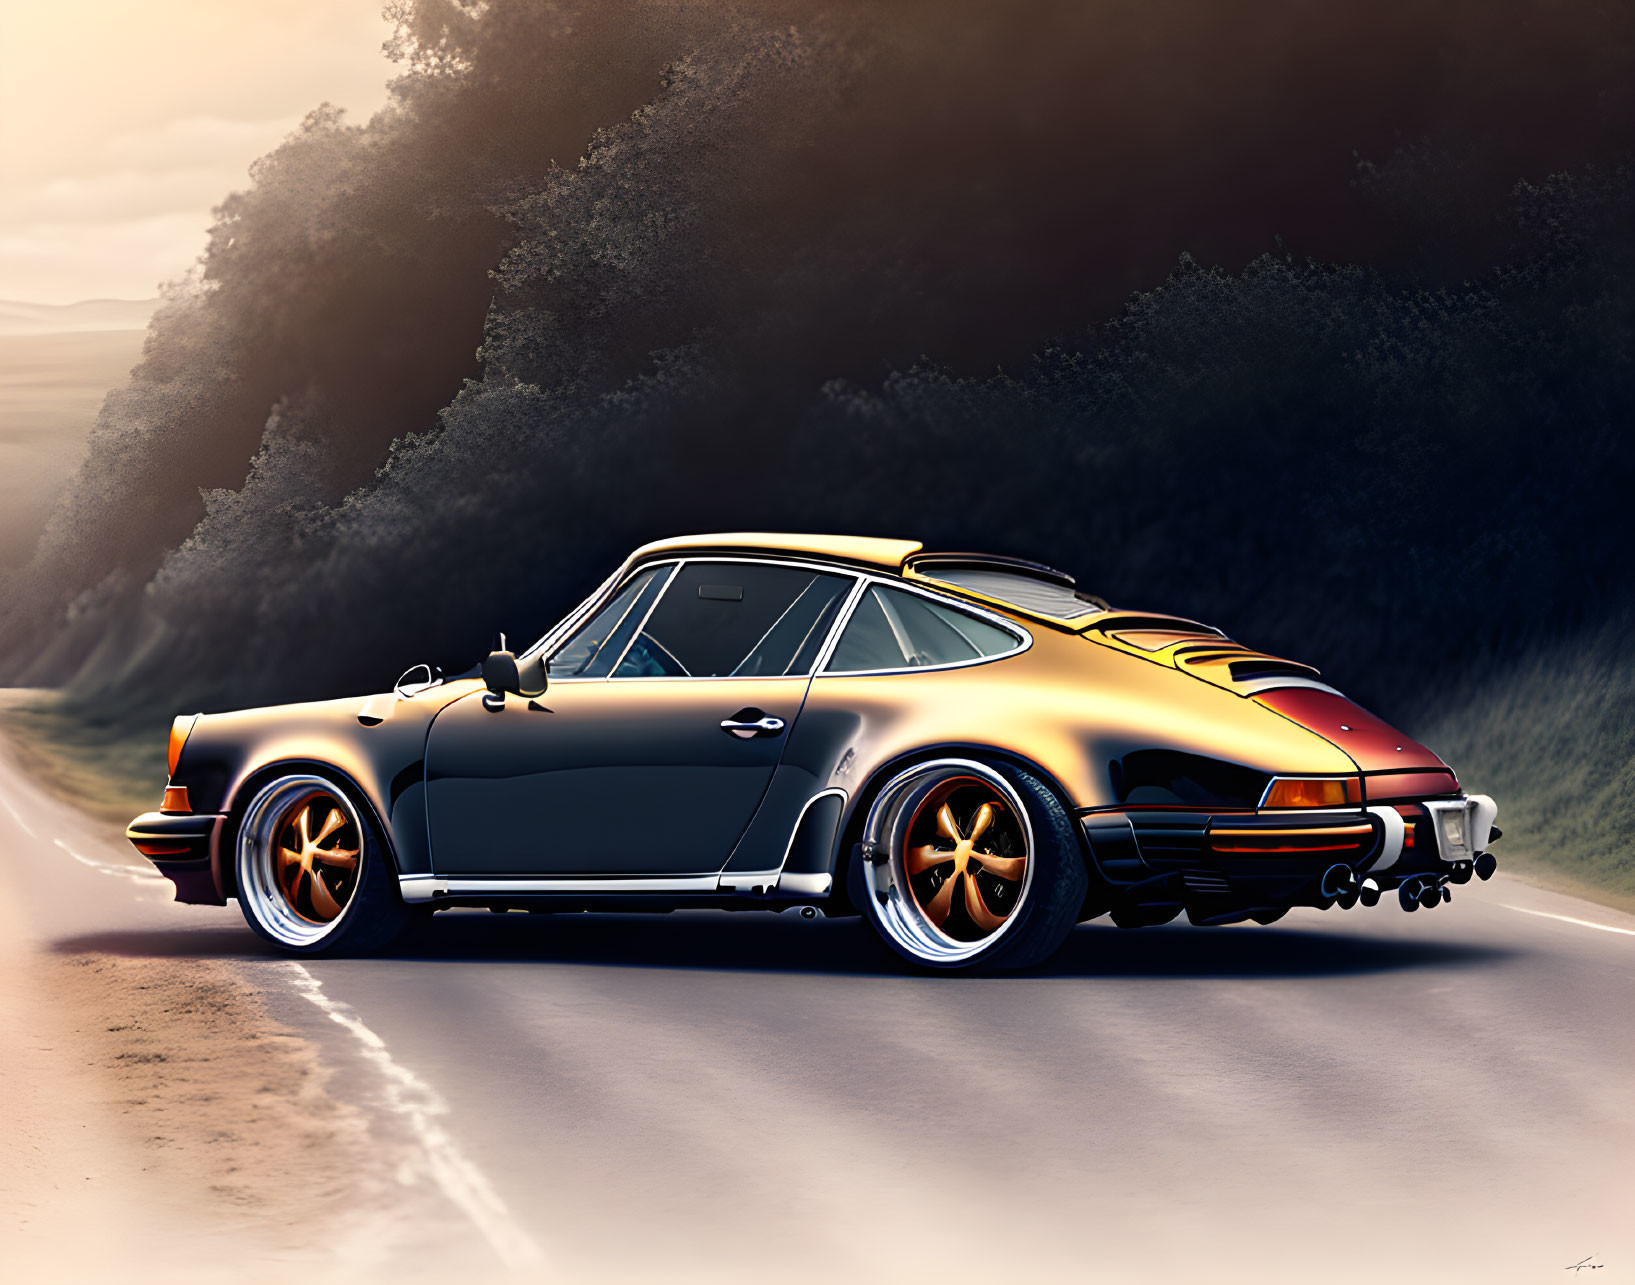 Vintage Porsche 911 in Black and Gold on Winding Road